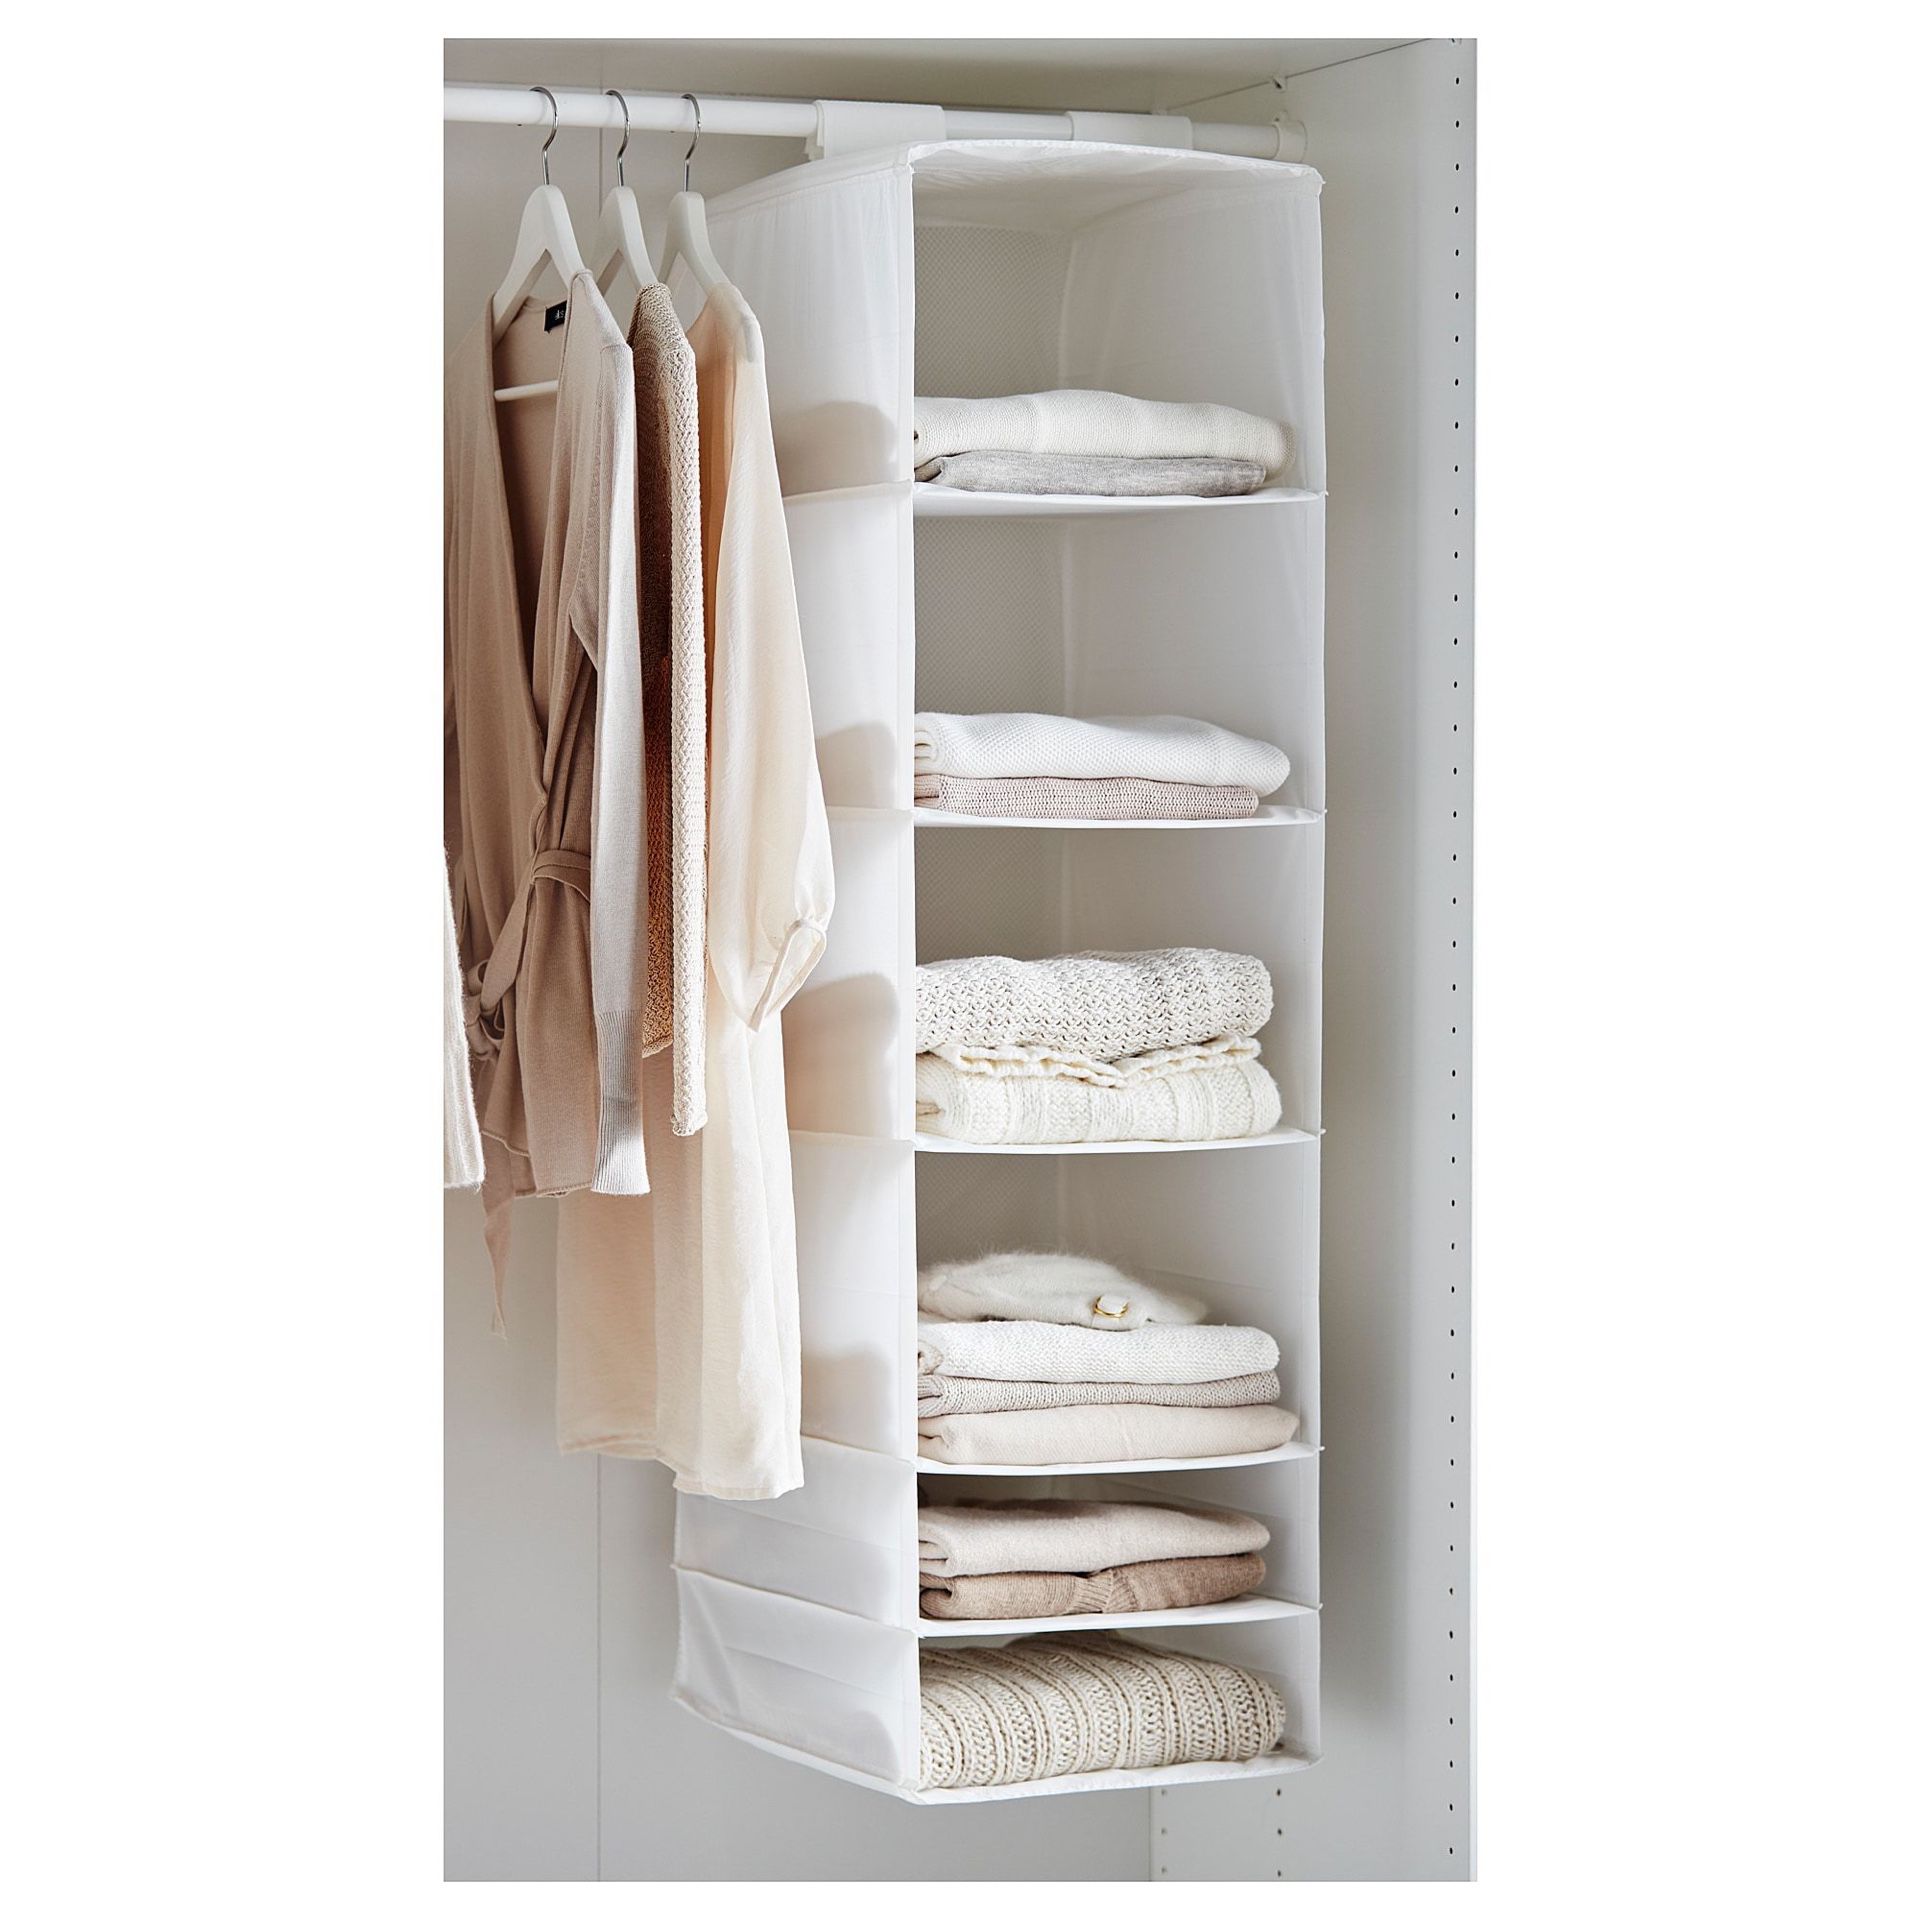 Clothes and shoe organizer hanger portable travel